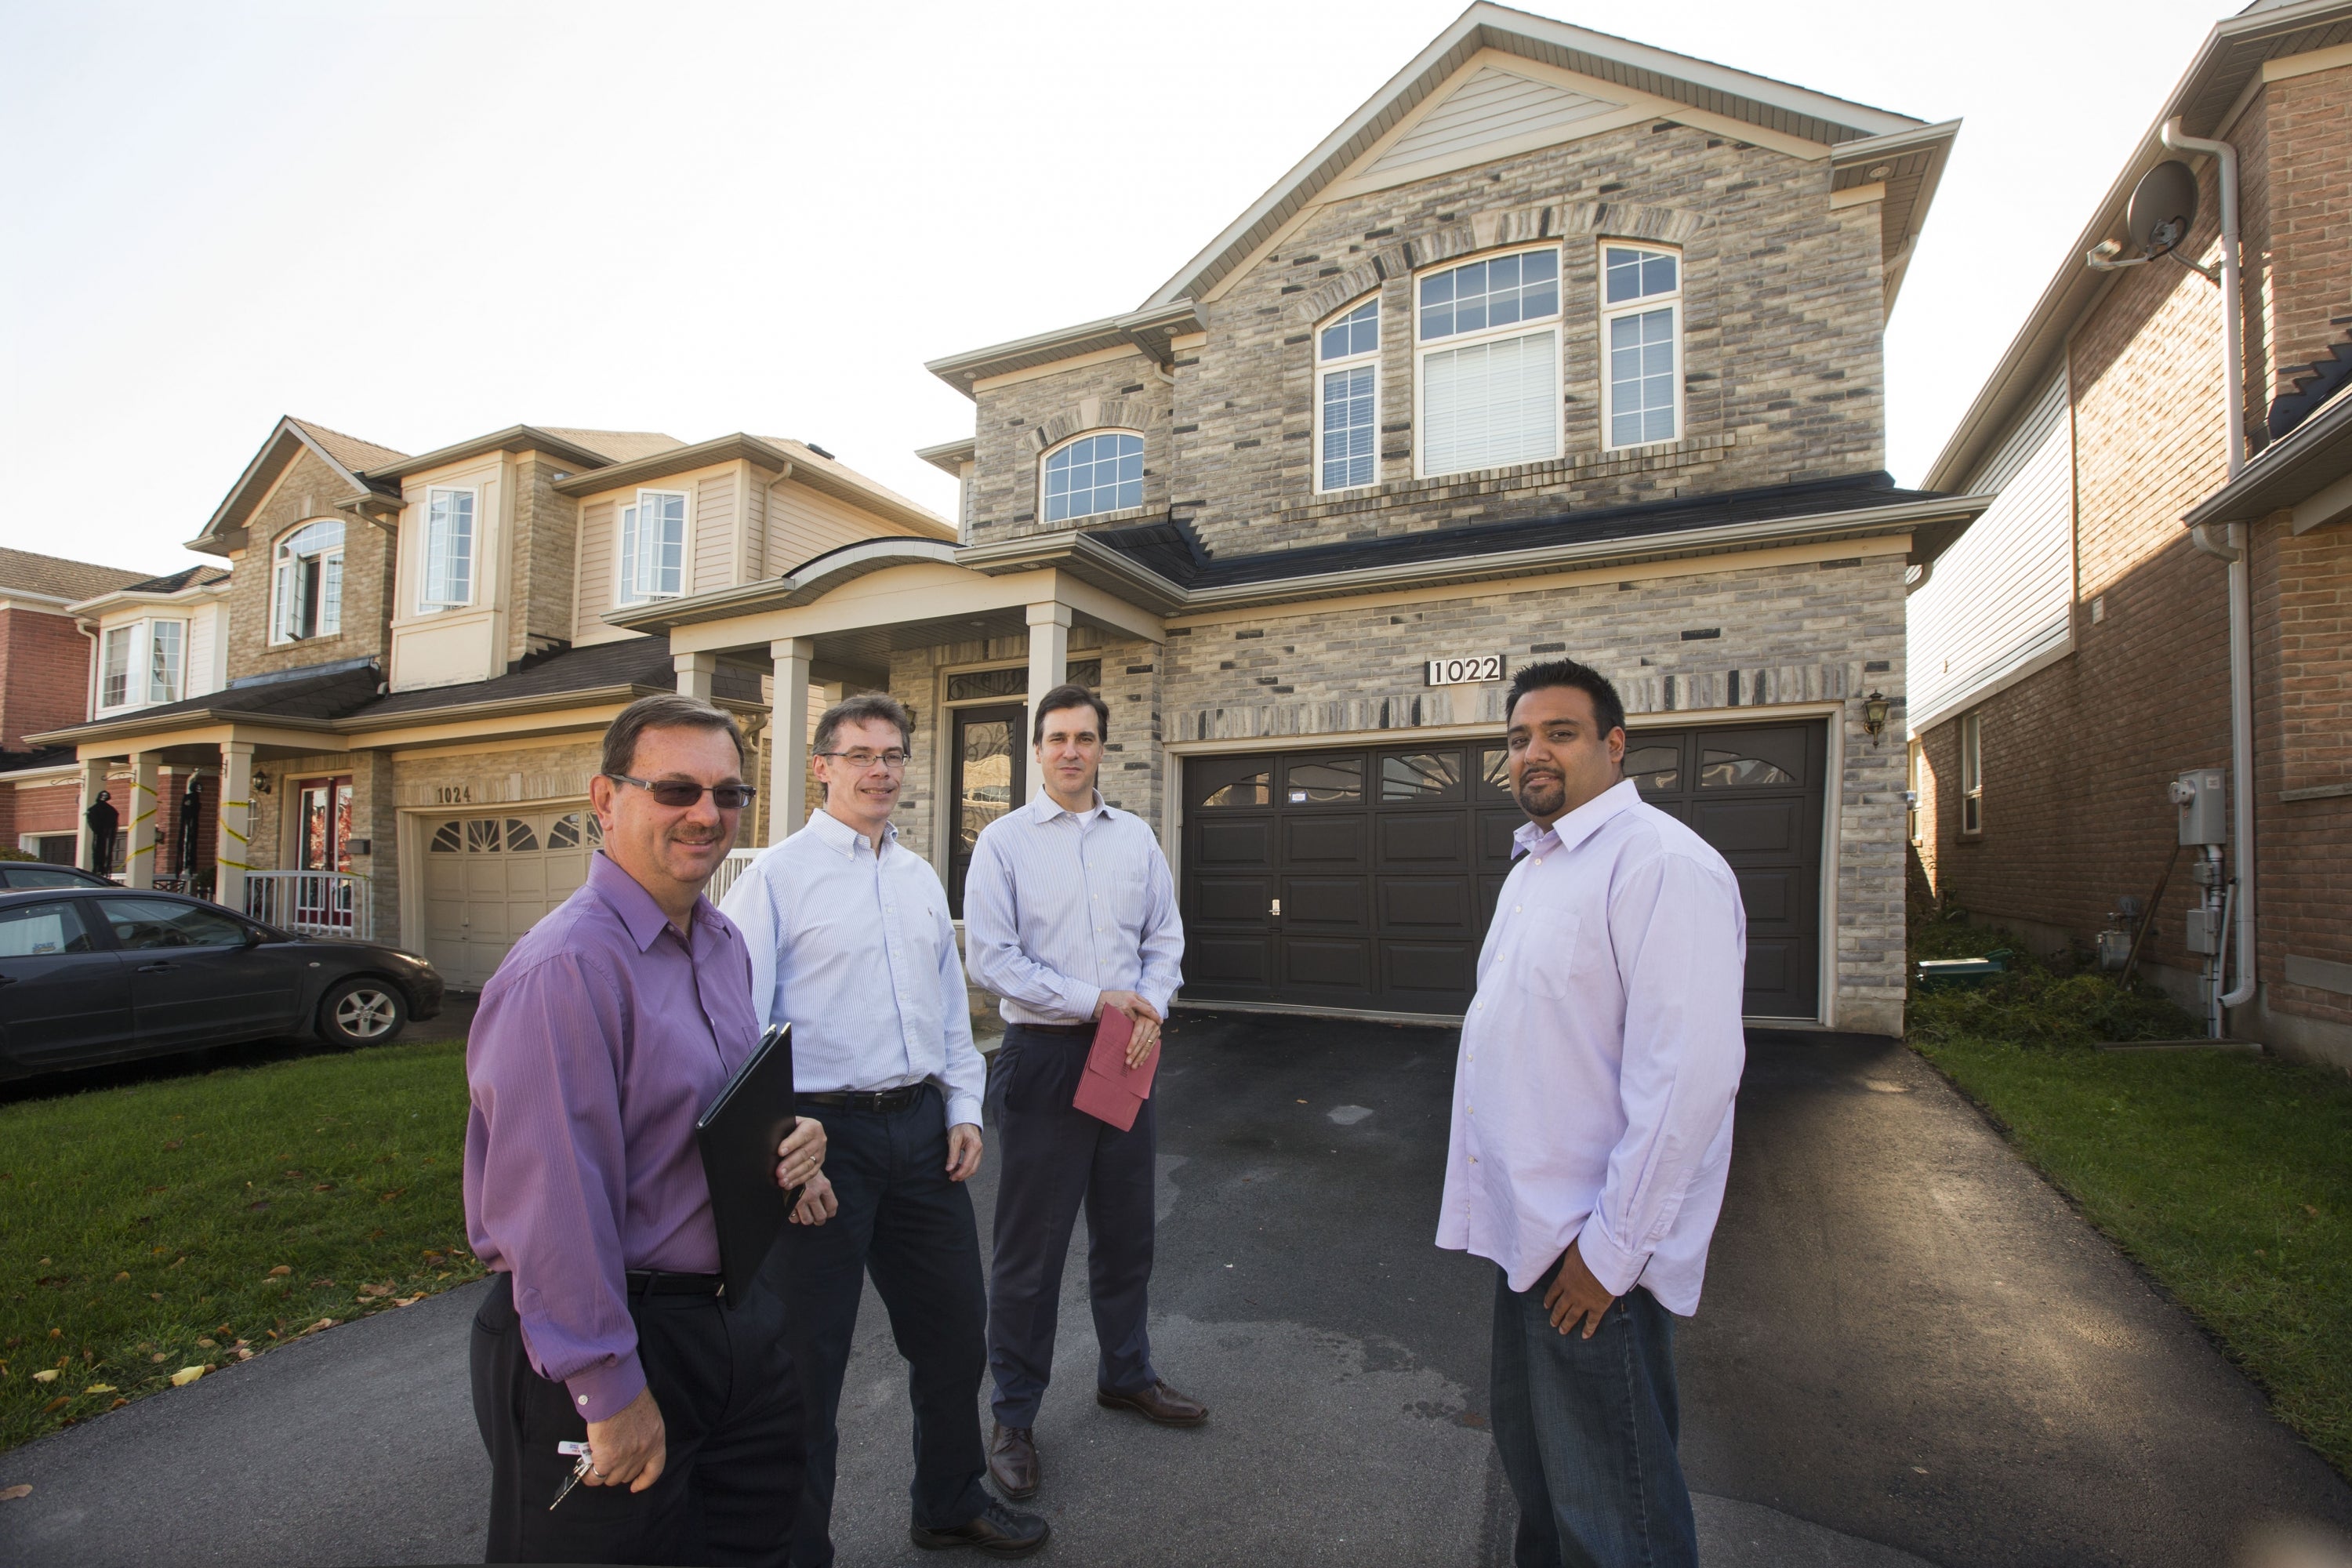 Frank Lasowksi, Gord Ellis, Ian Rowlands, and Deep Mehta in front of a house.